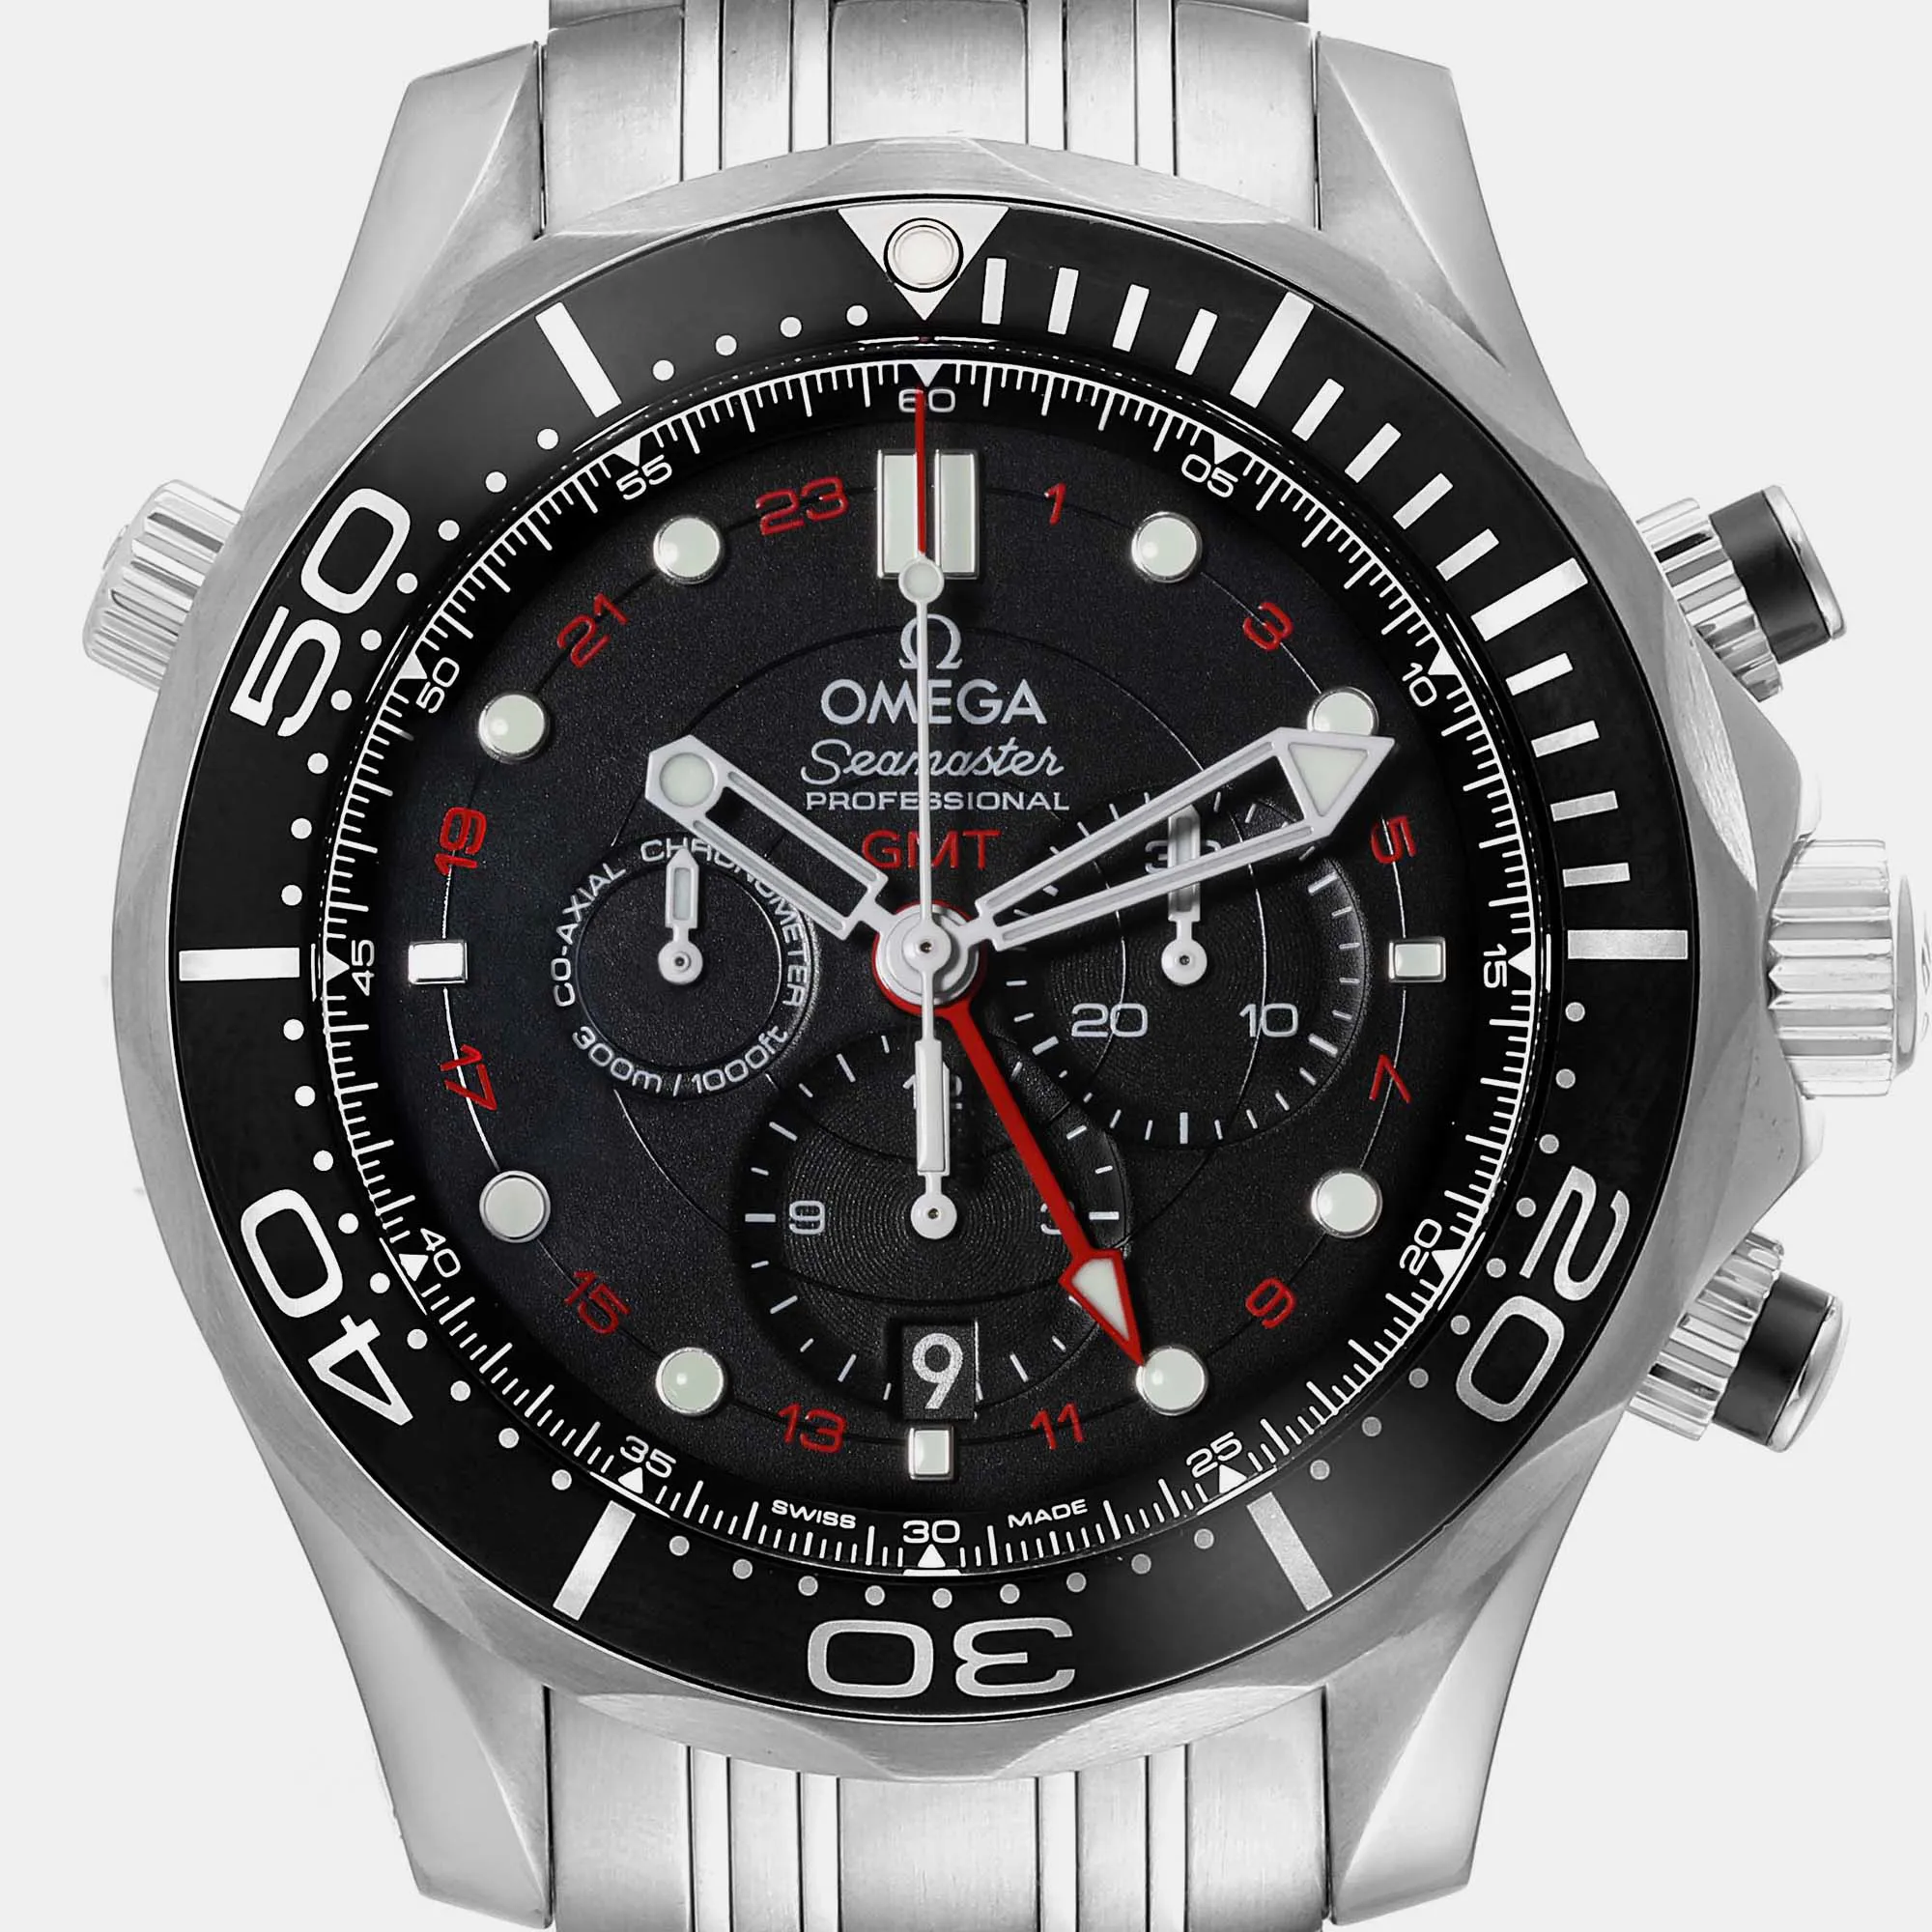 Omega Seamaster Diver 300M 212.30.44.52.01.001 44mm Stainless steel 4